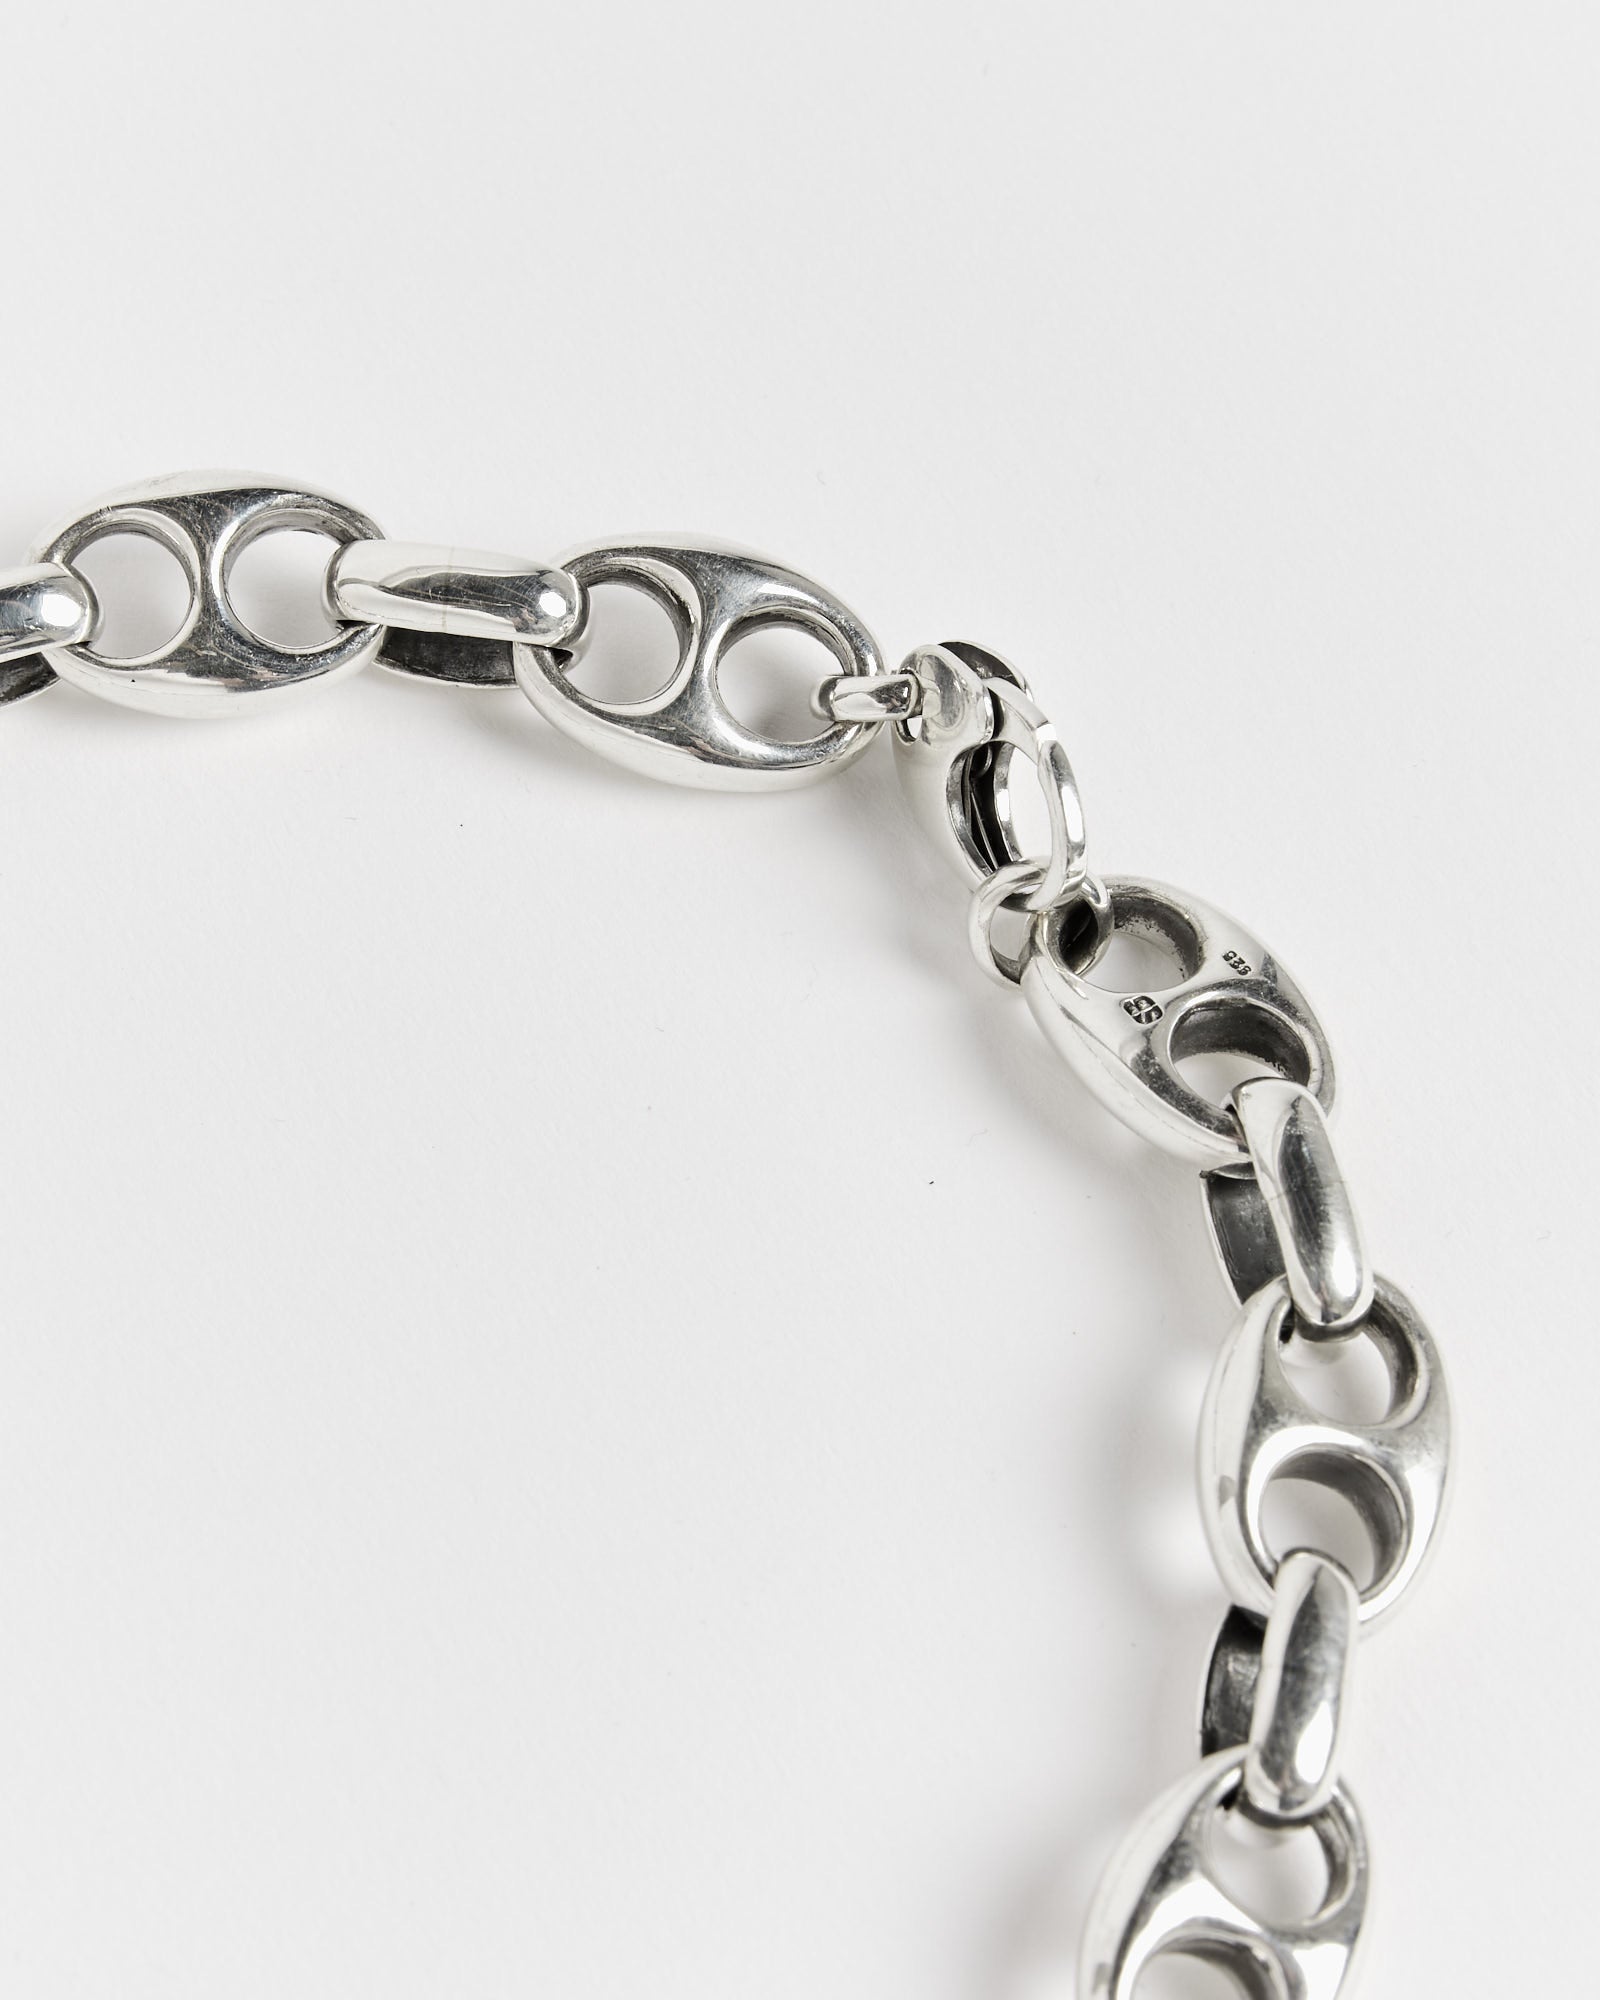 Barbara Chain Necklace in Sterling Silver